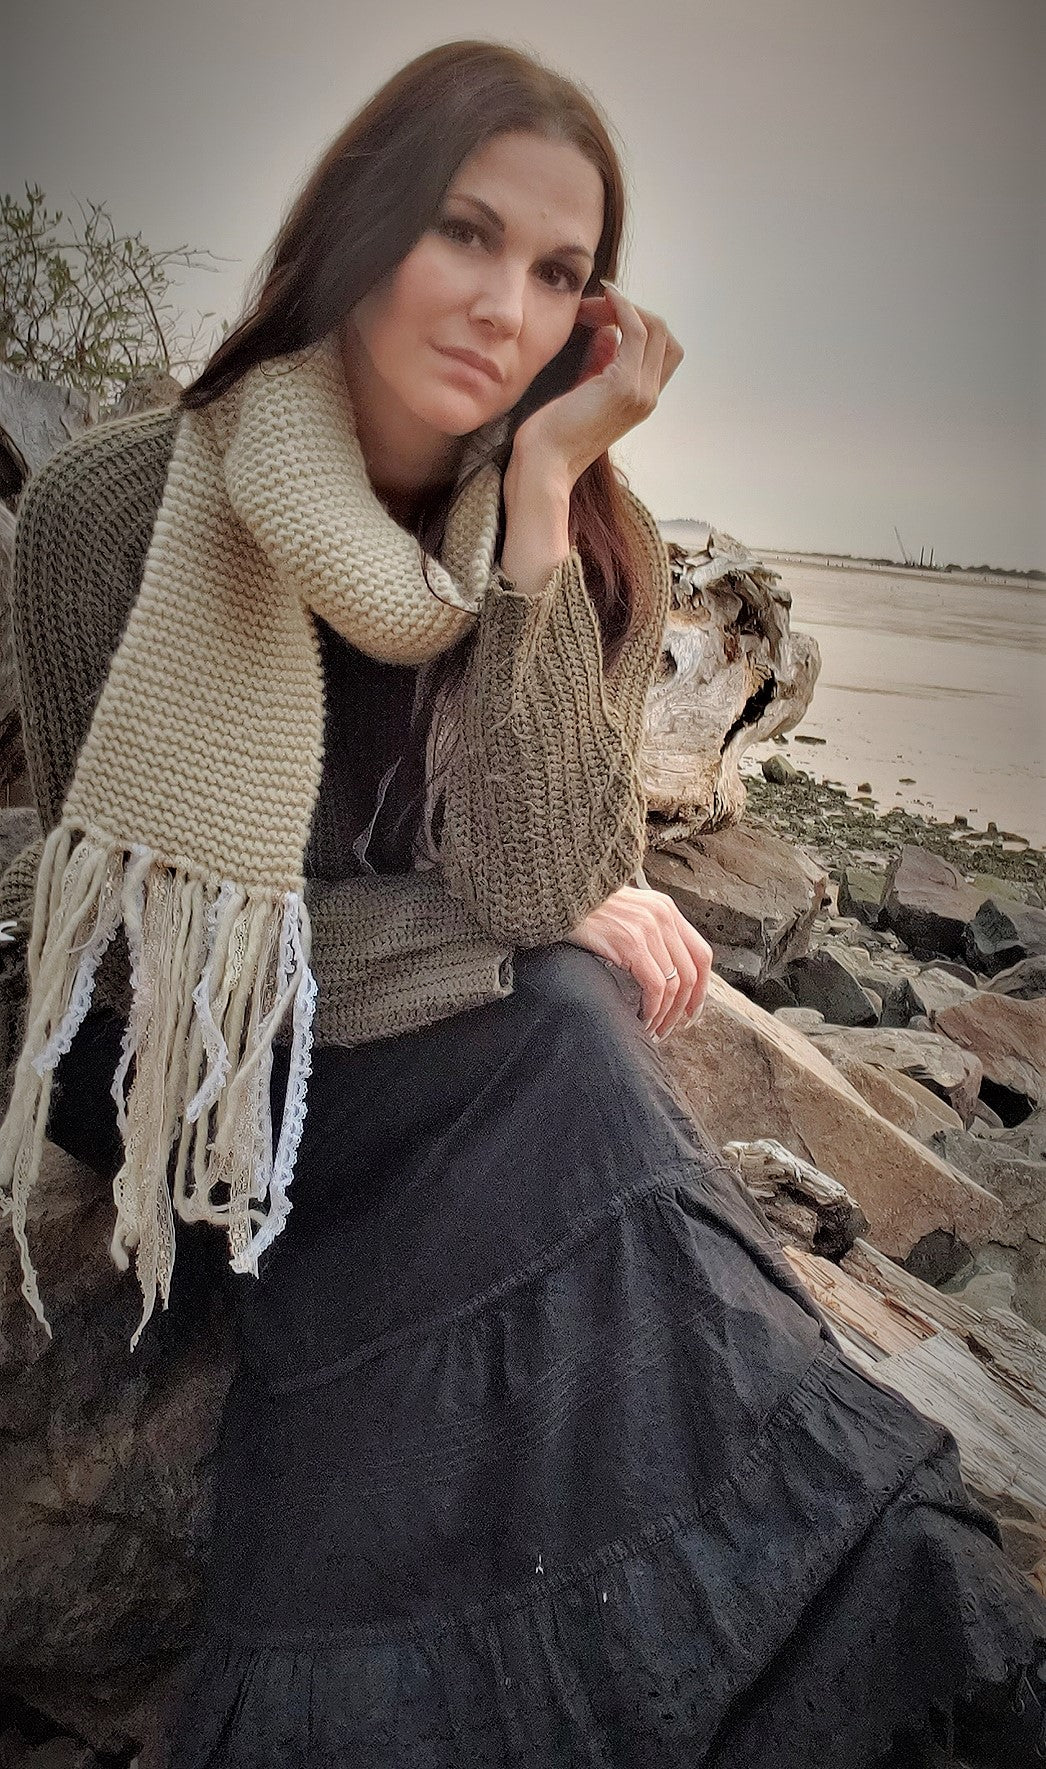 The "Fawn" Cream Knit Scarf with Vintage Lace Fringe